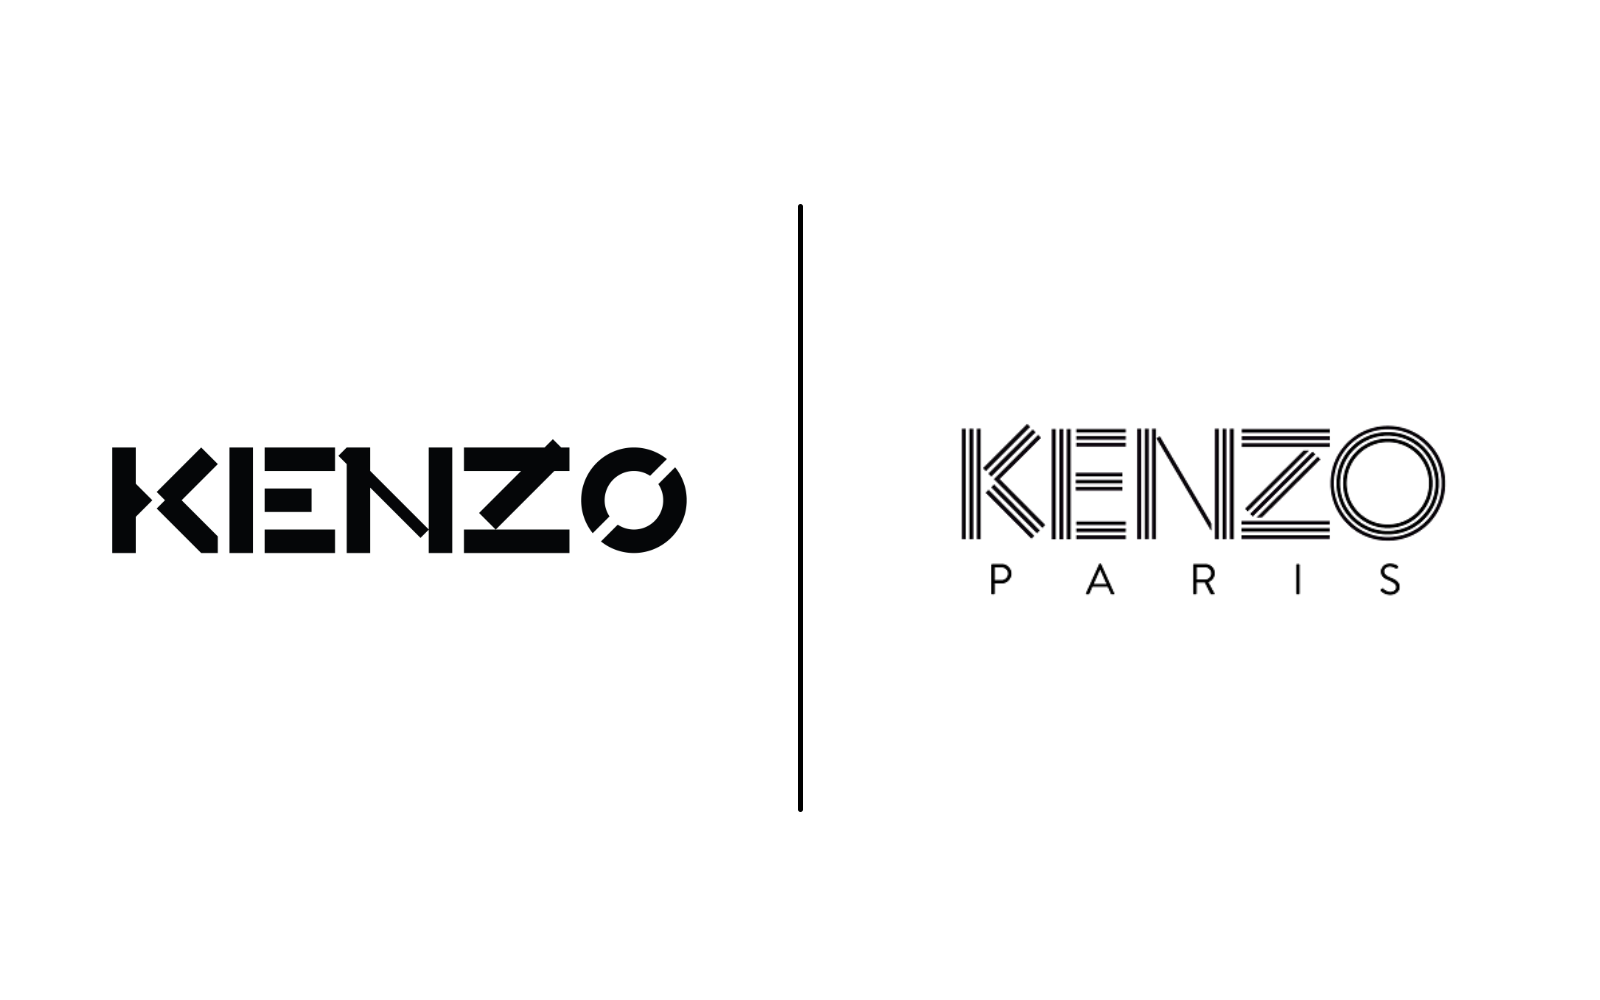 KENZO has a new logo Designed by the new creative director of the brand Felipe Oliveira Baptista